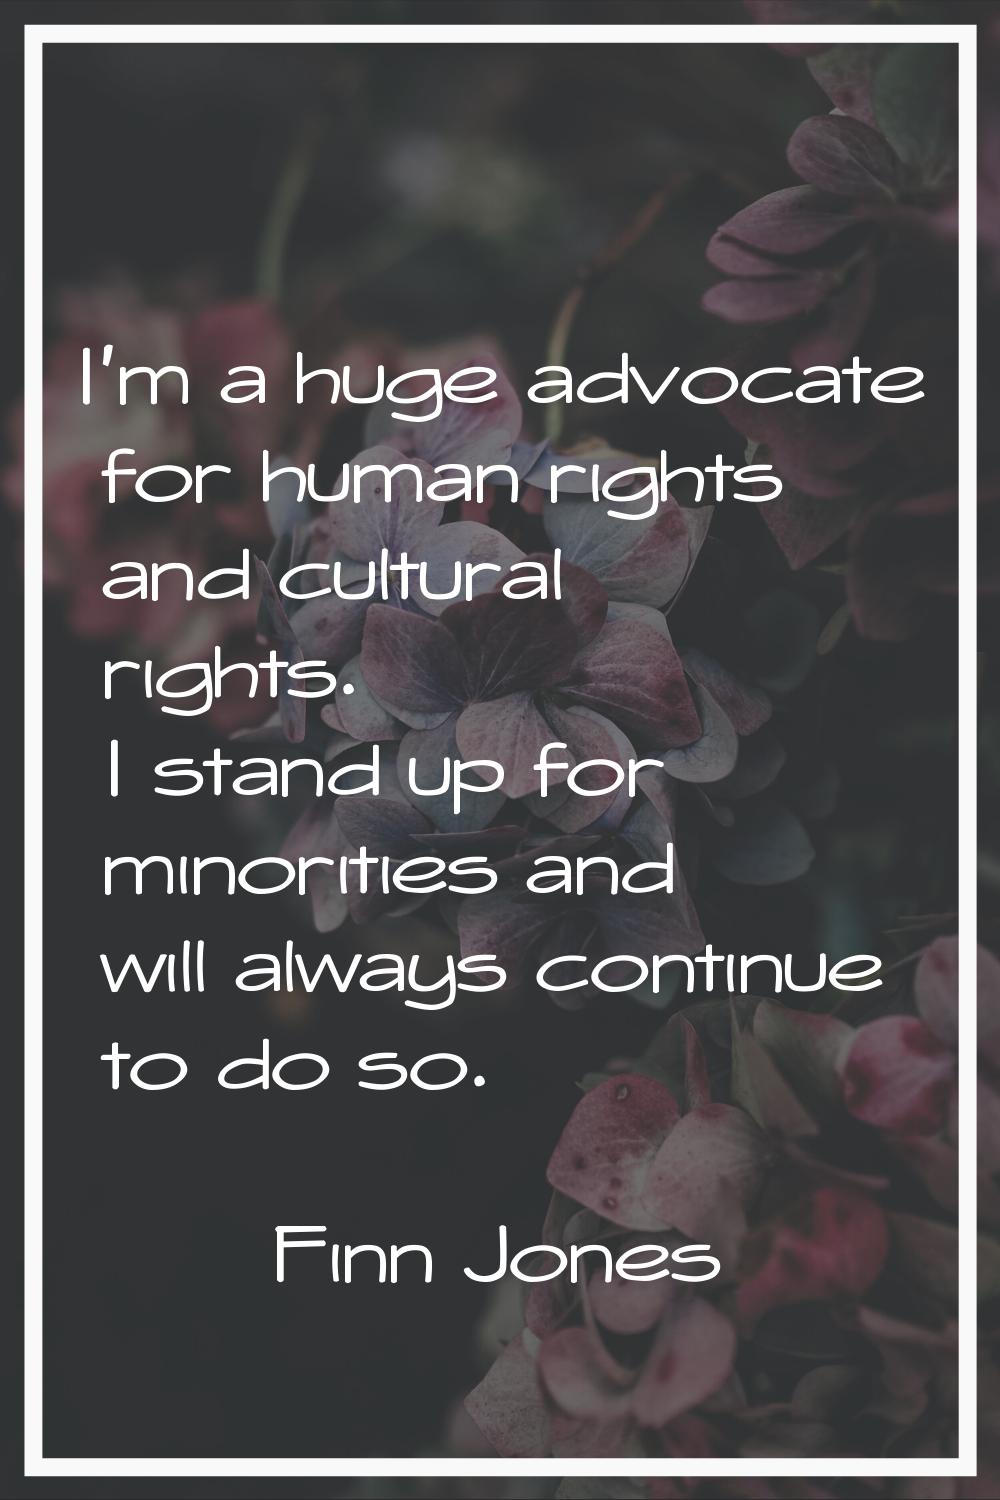 I'm a huge advocate for human rights and cultural rights. I stand up for minorities and will always